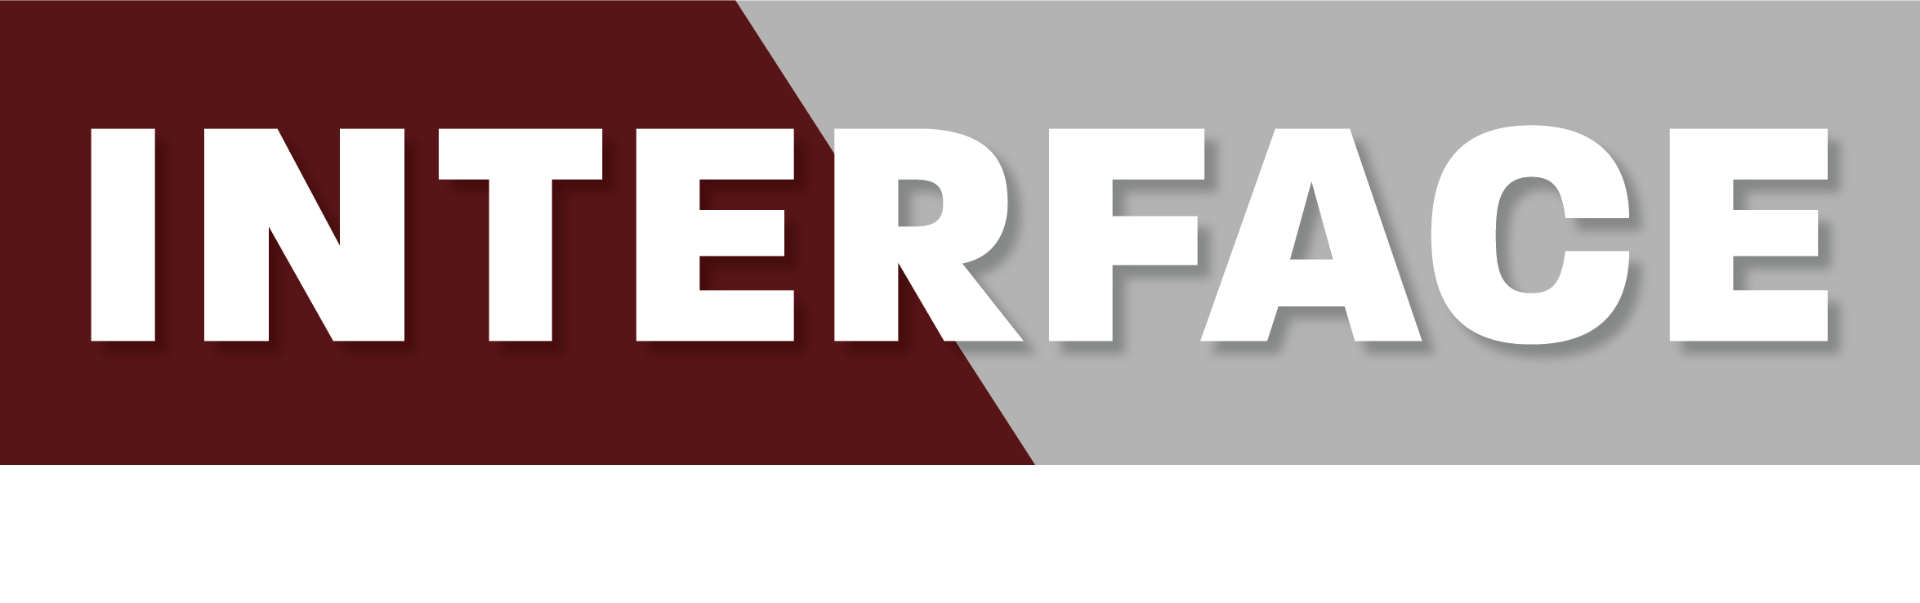 Interface Logo - Interface Consulting Consulting Firm